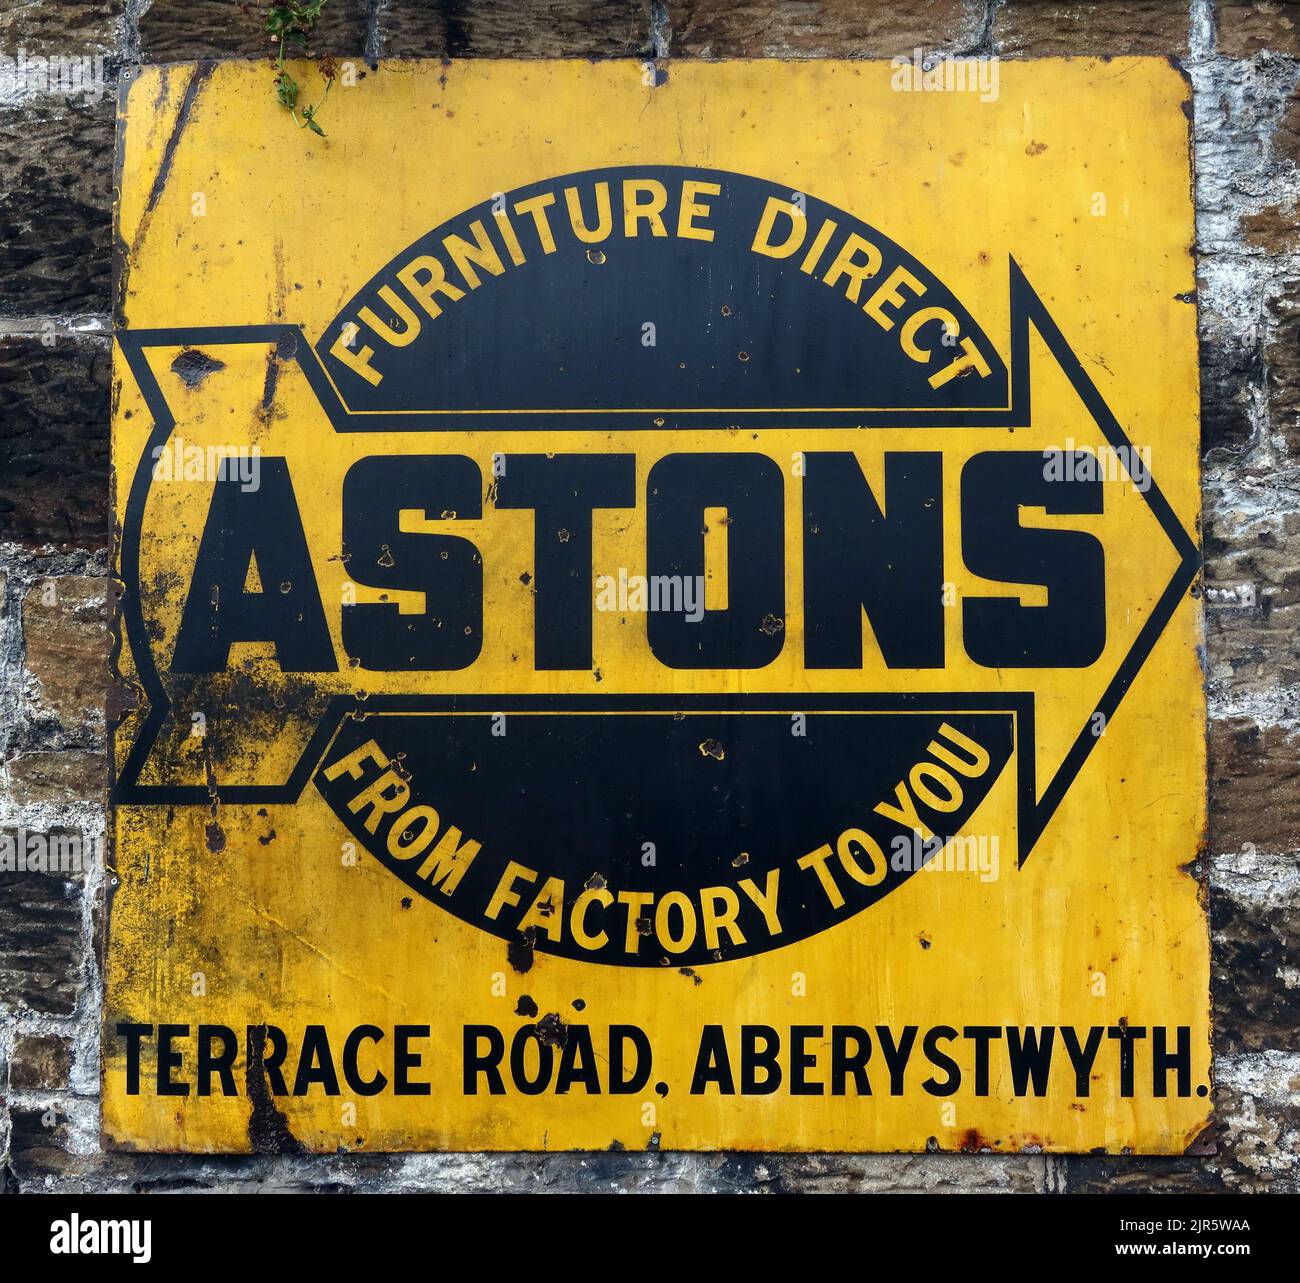 Astons Terrace Road, Aberystwyth , Furniture direct, from factory to you, advert, Wales, United Kingdom Stock Photo